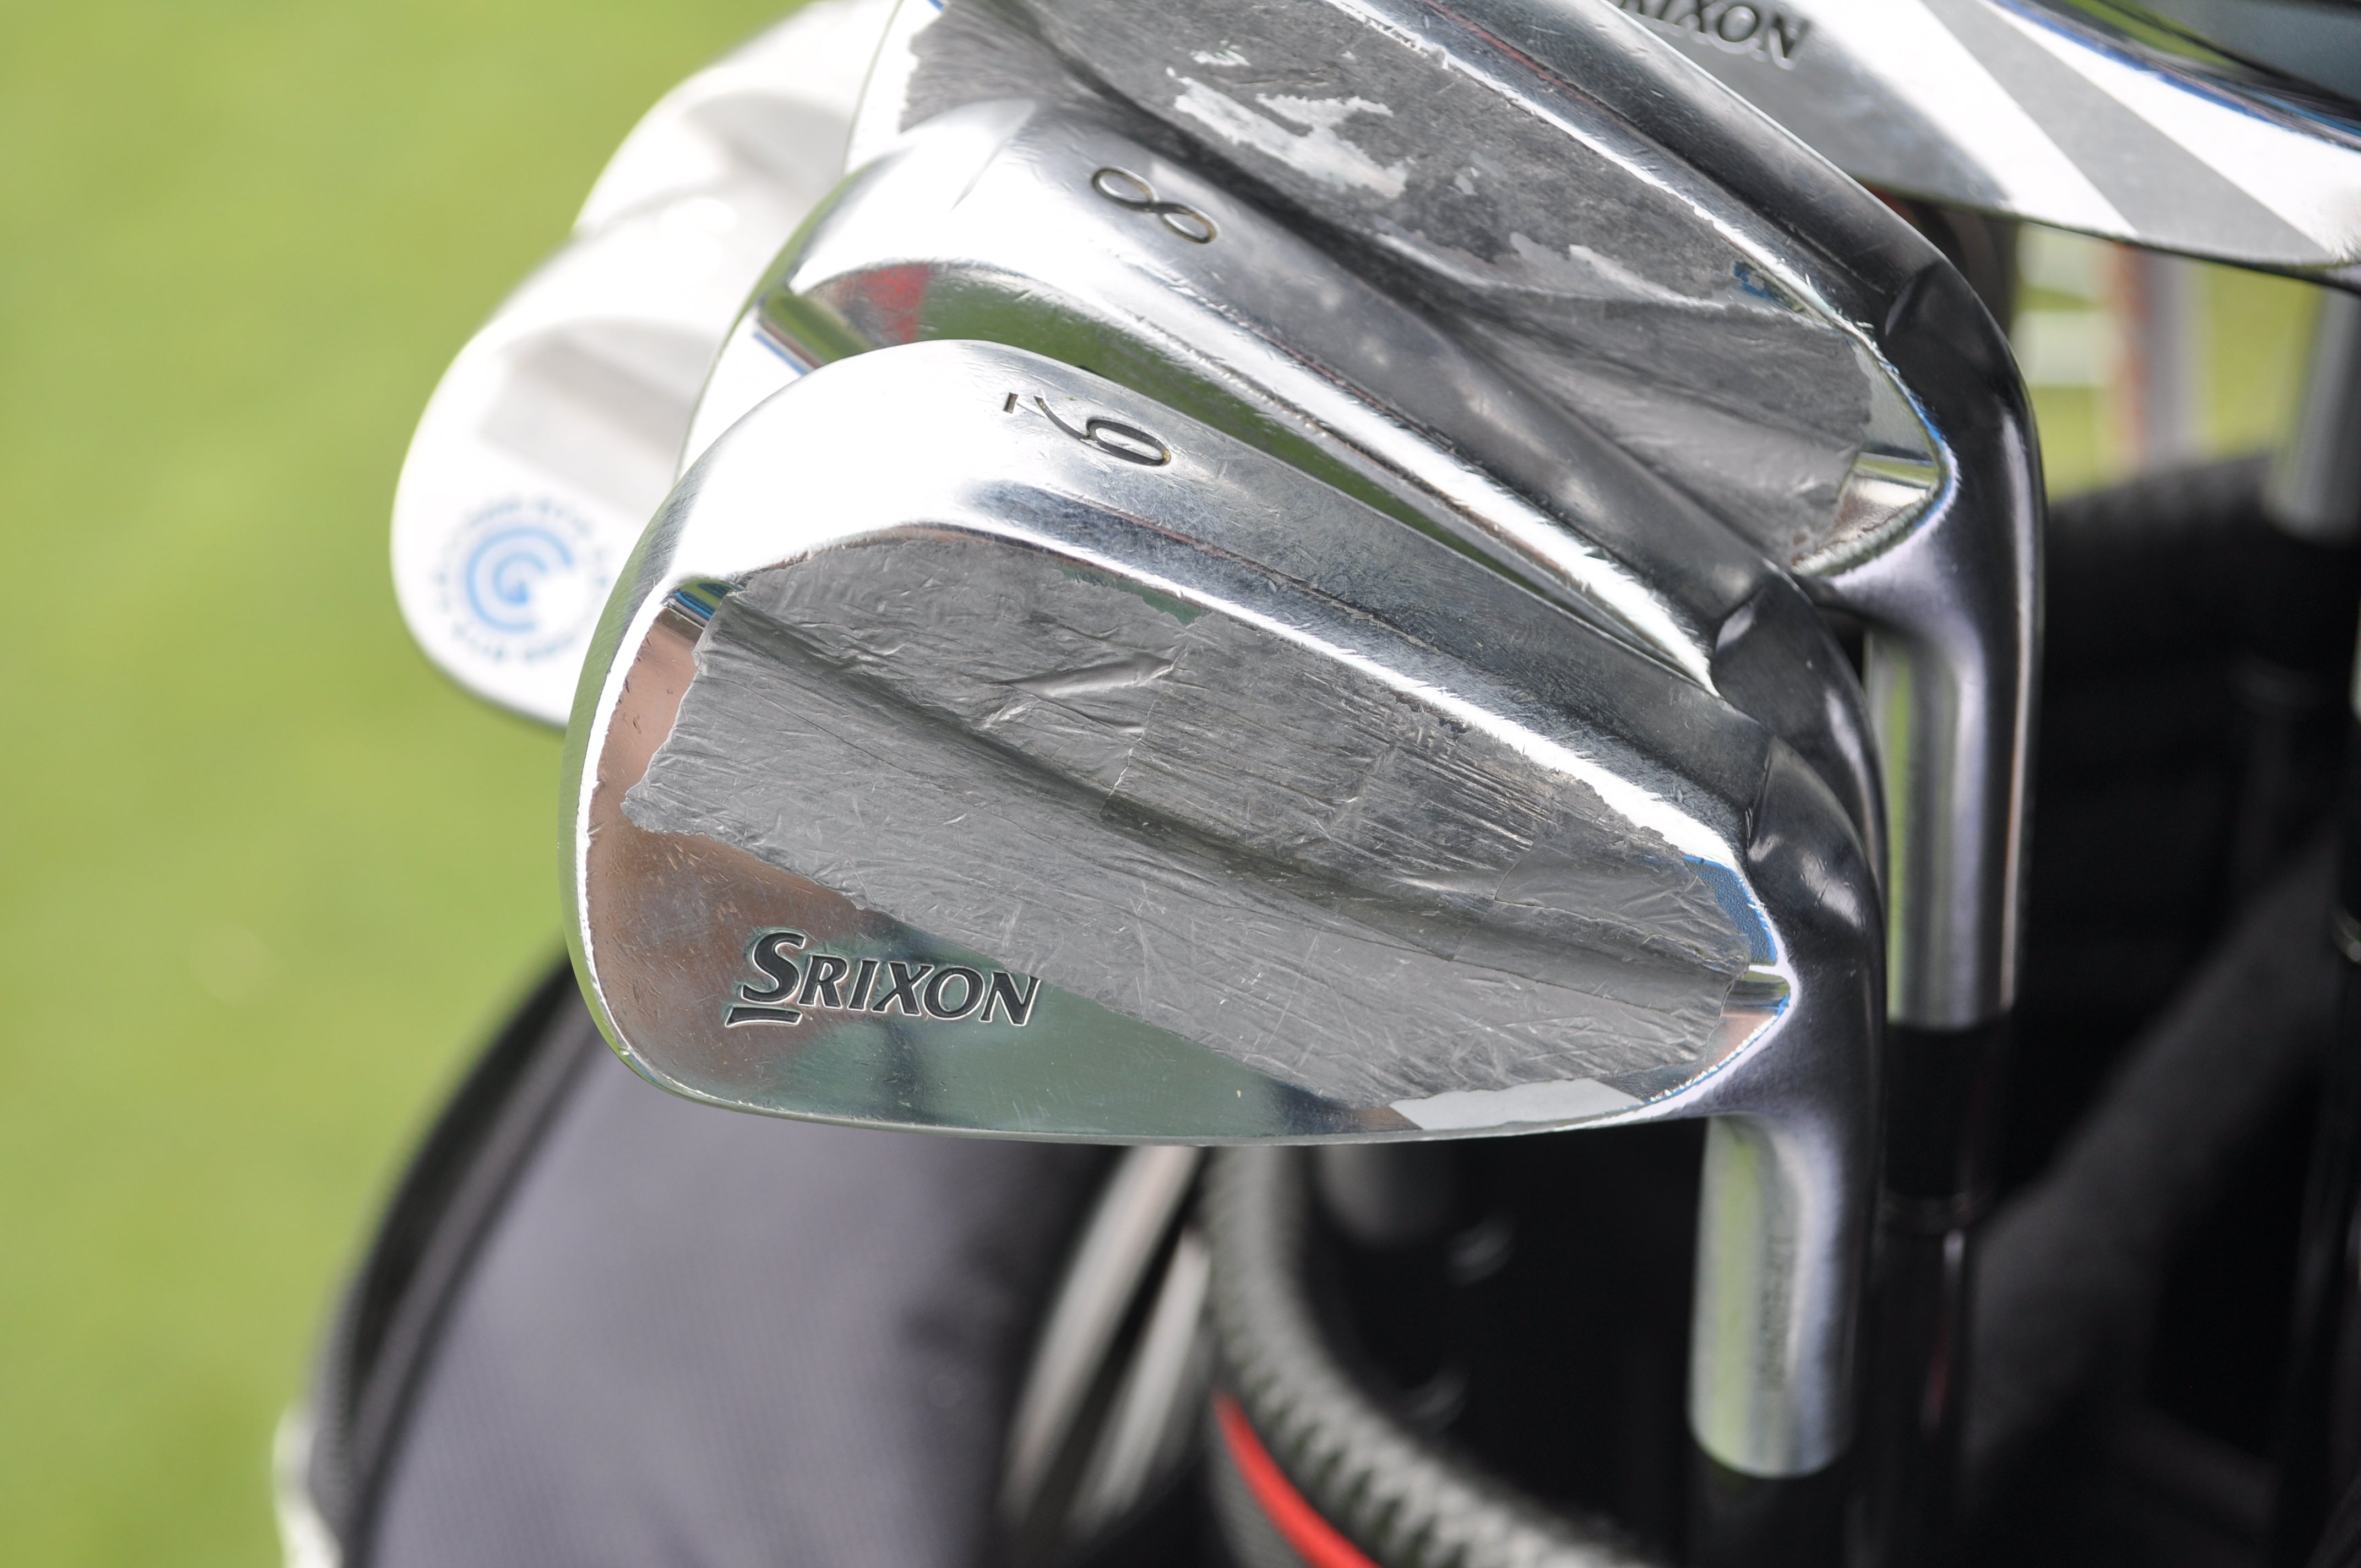 A strip of lead tape conceals the Z965 badging on Hideki Matsuyama's irons. 